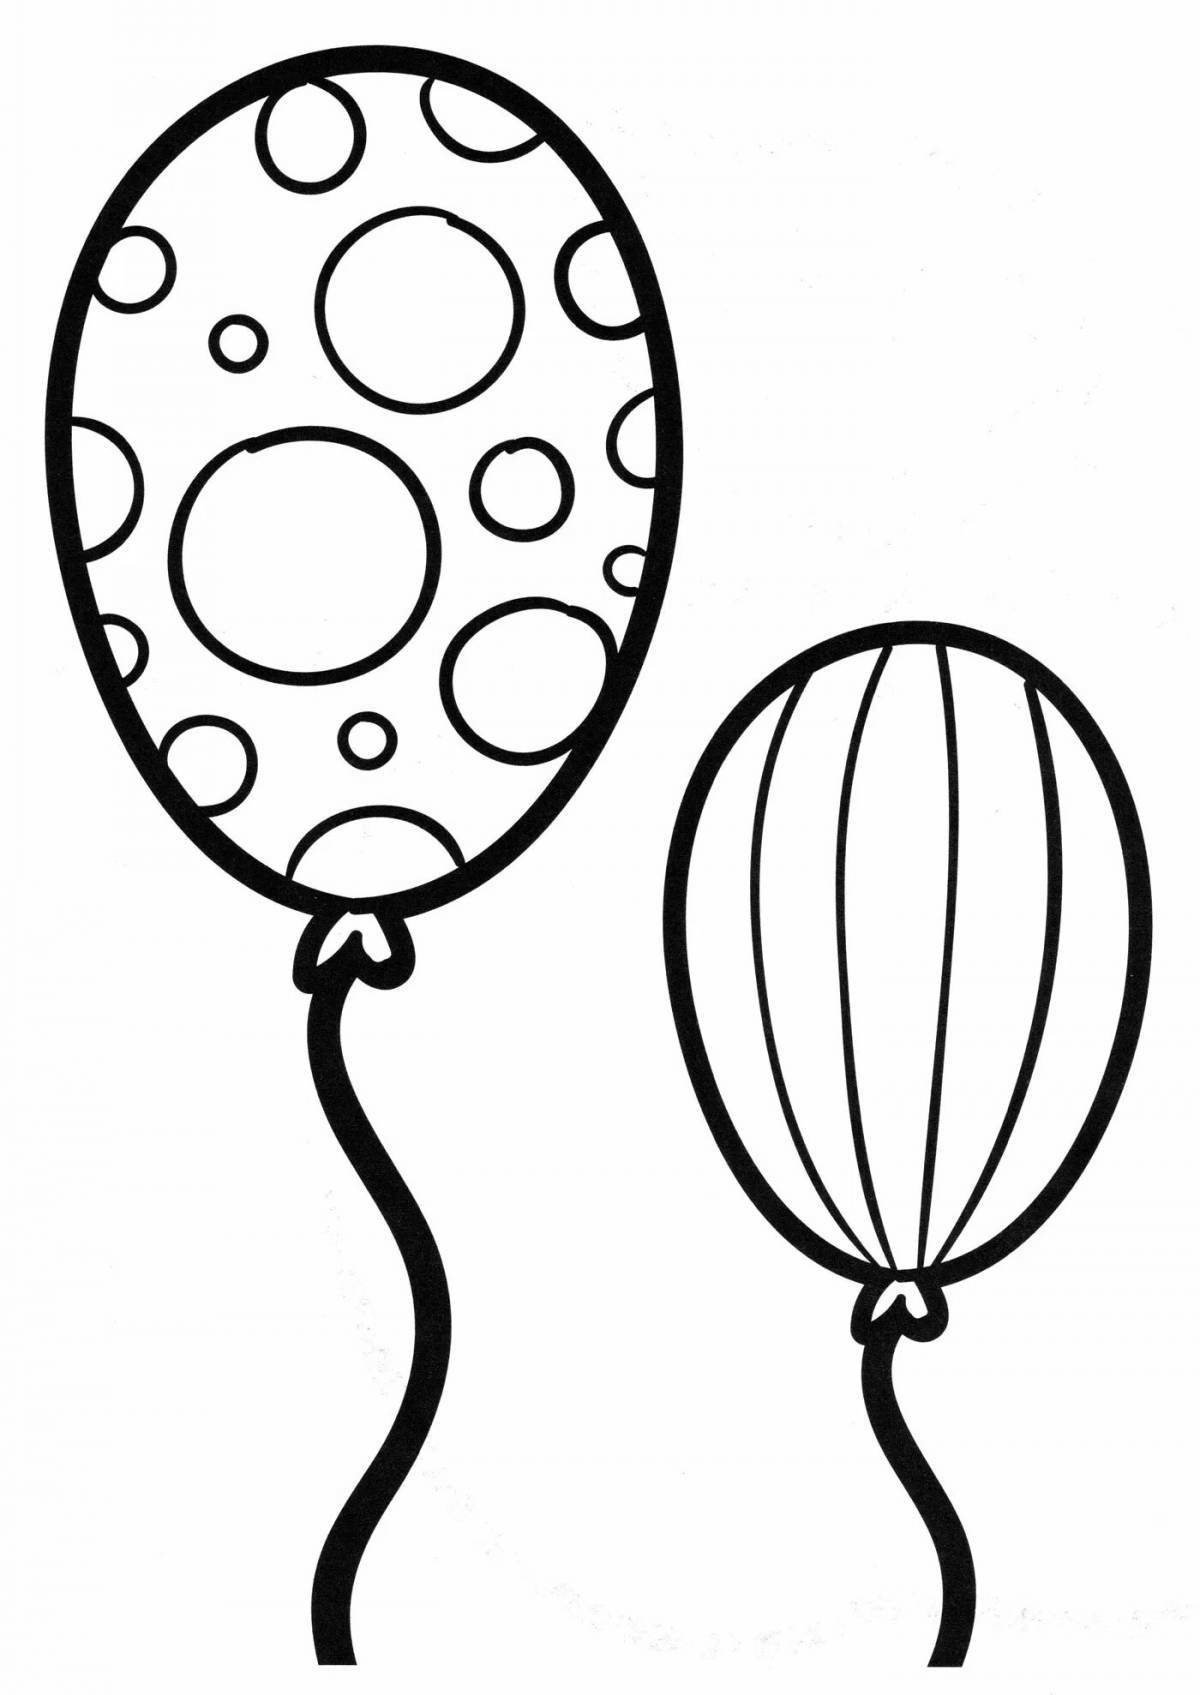 Great balloon coloring book for 2-3 year olds